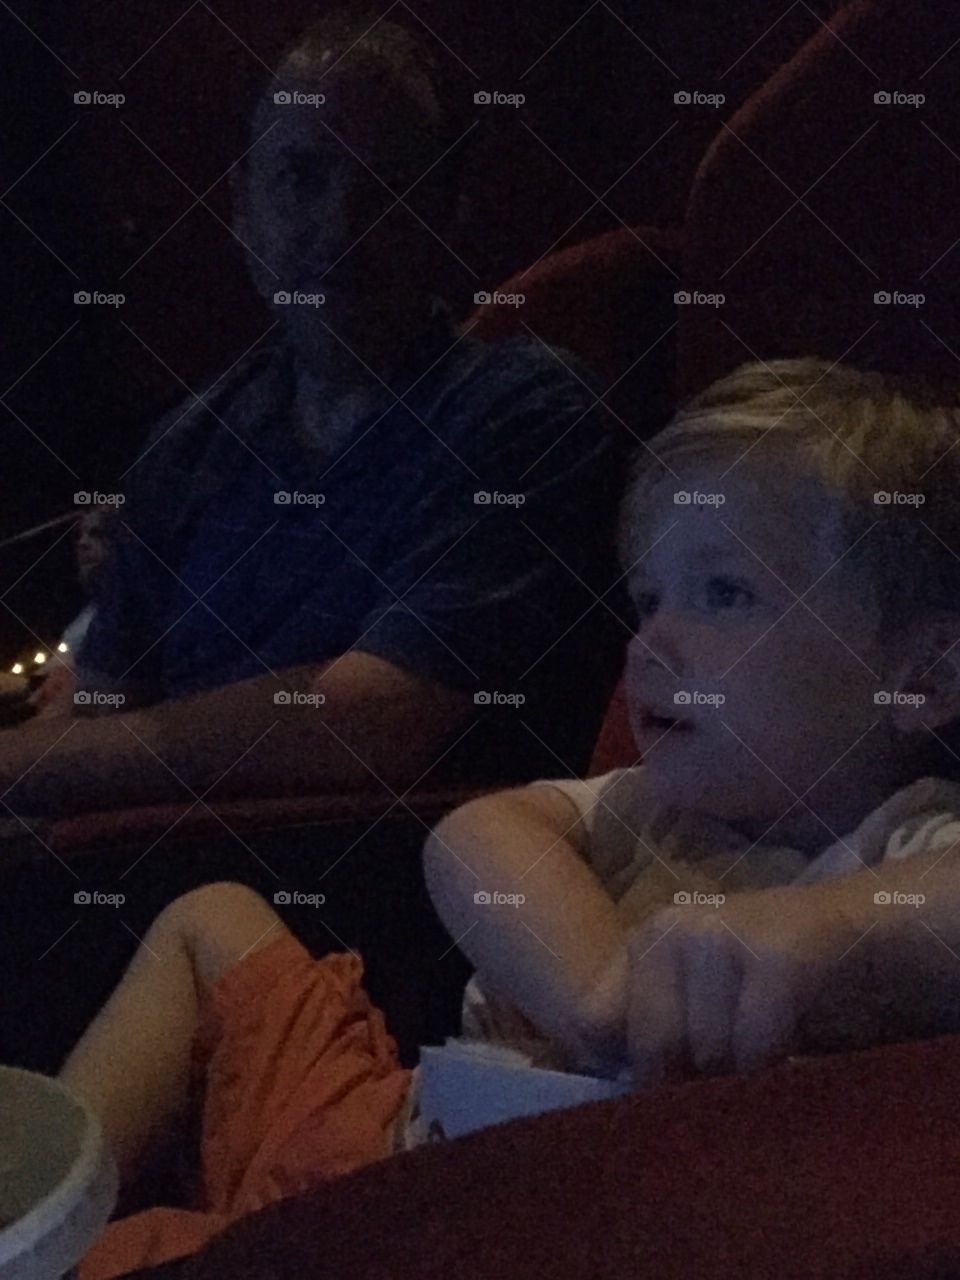 First night at the movies. Boy at his first movie with popcorn 